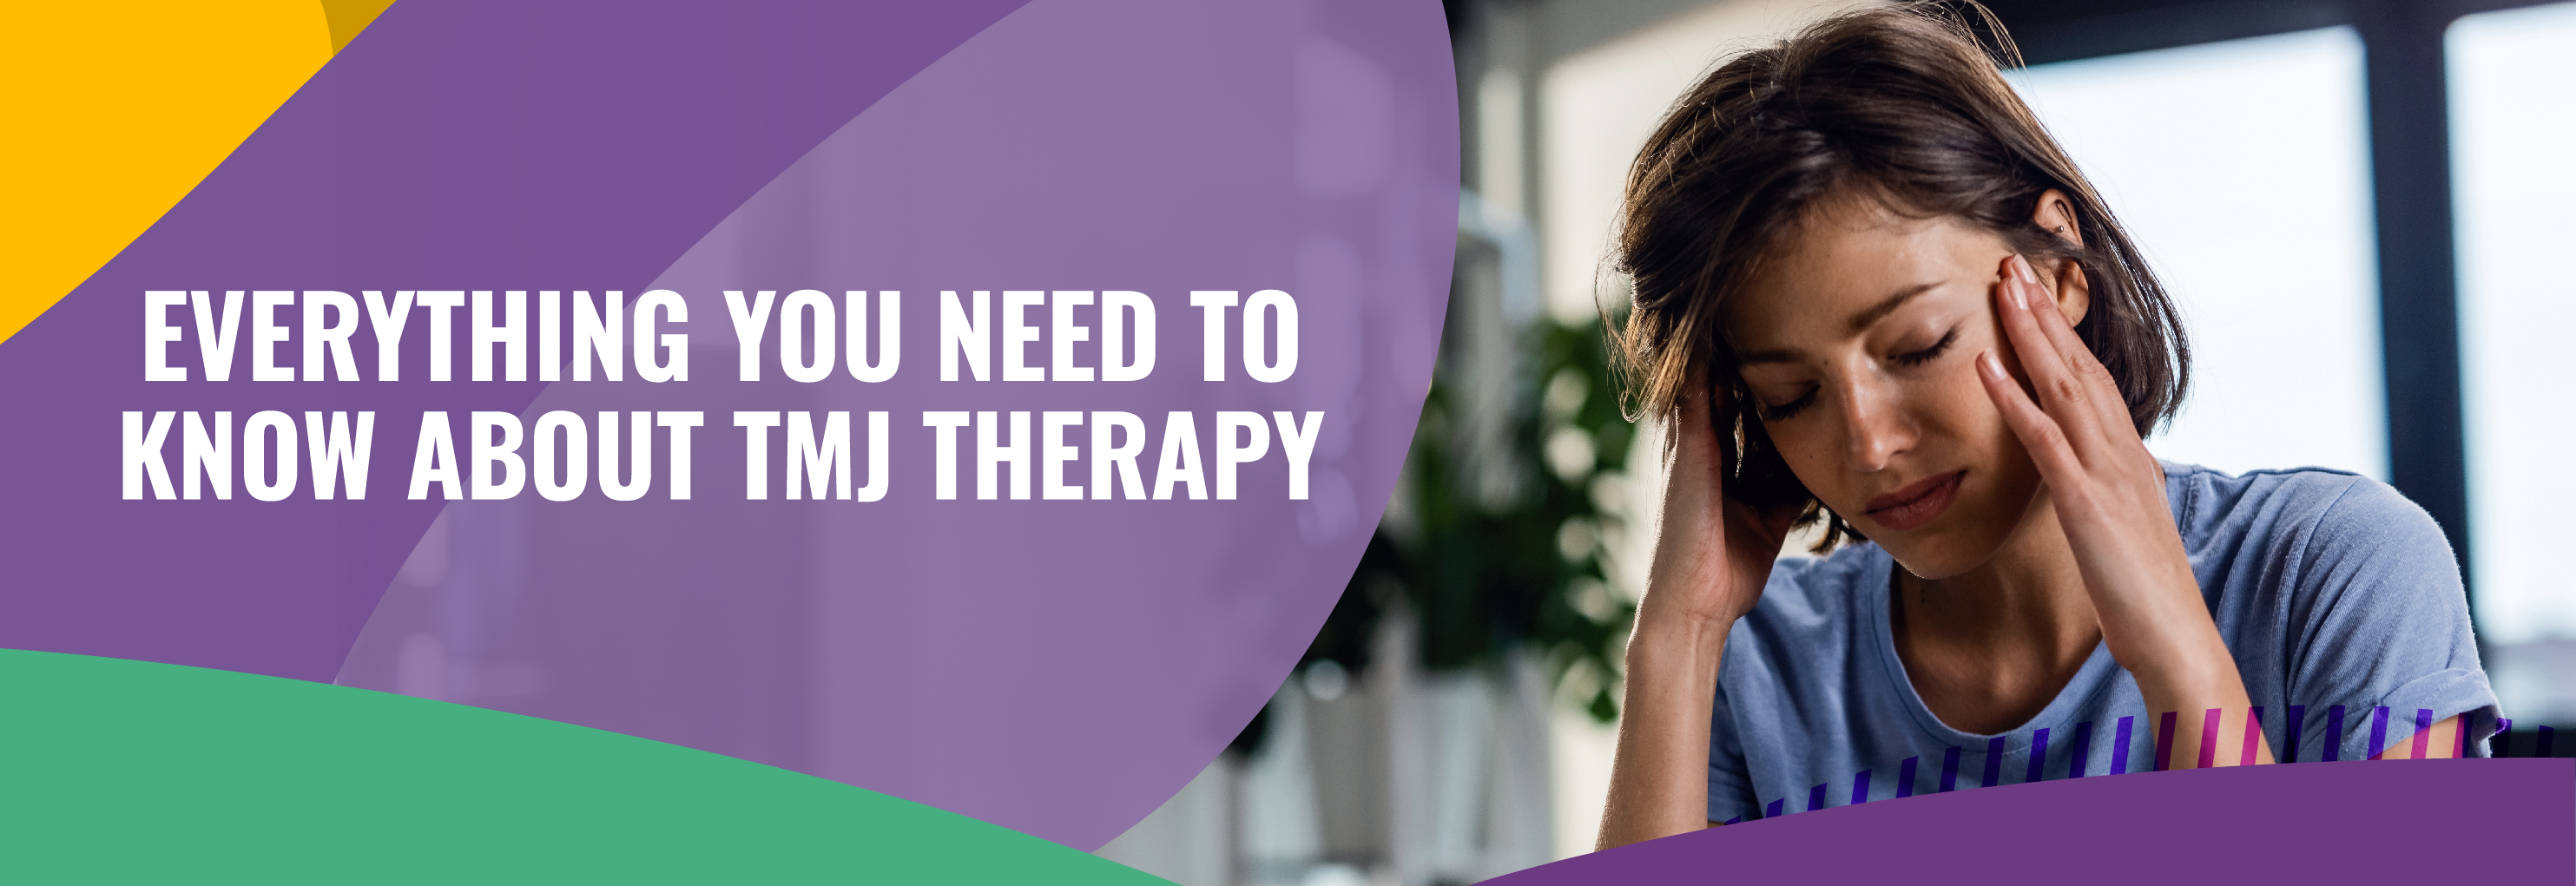 Everything You Need to Know About TMJ Therapy